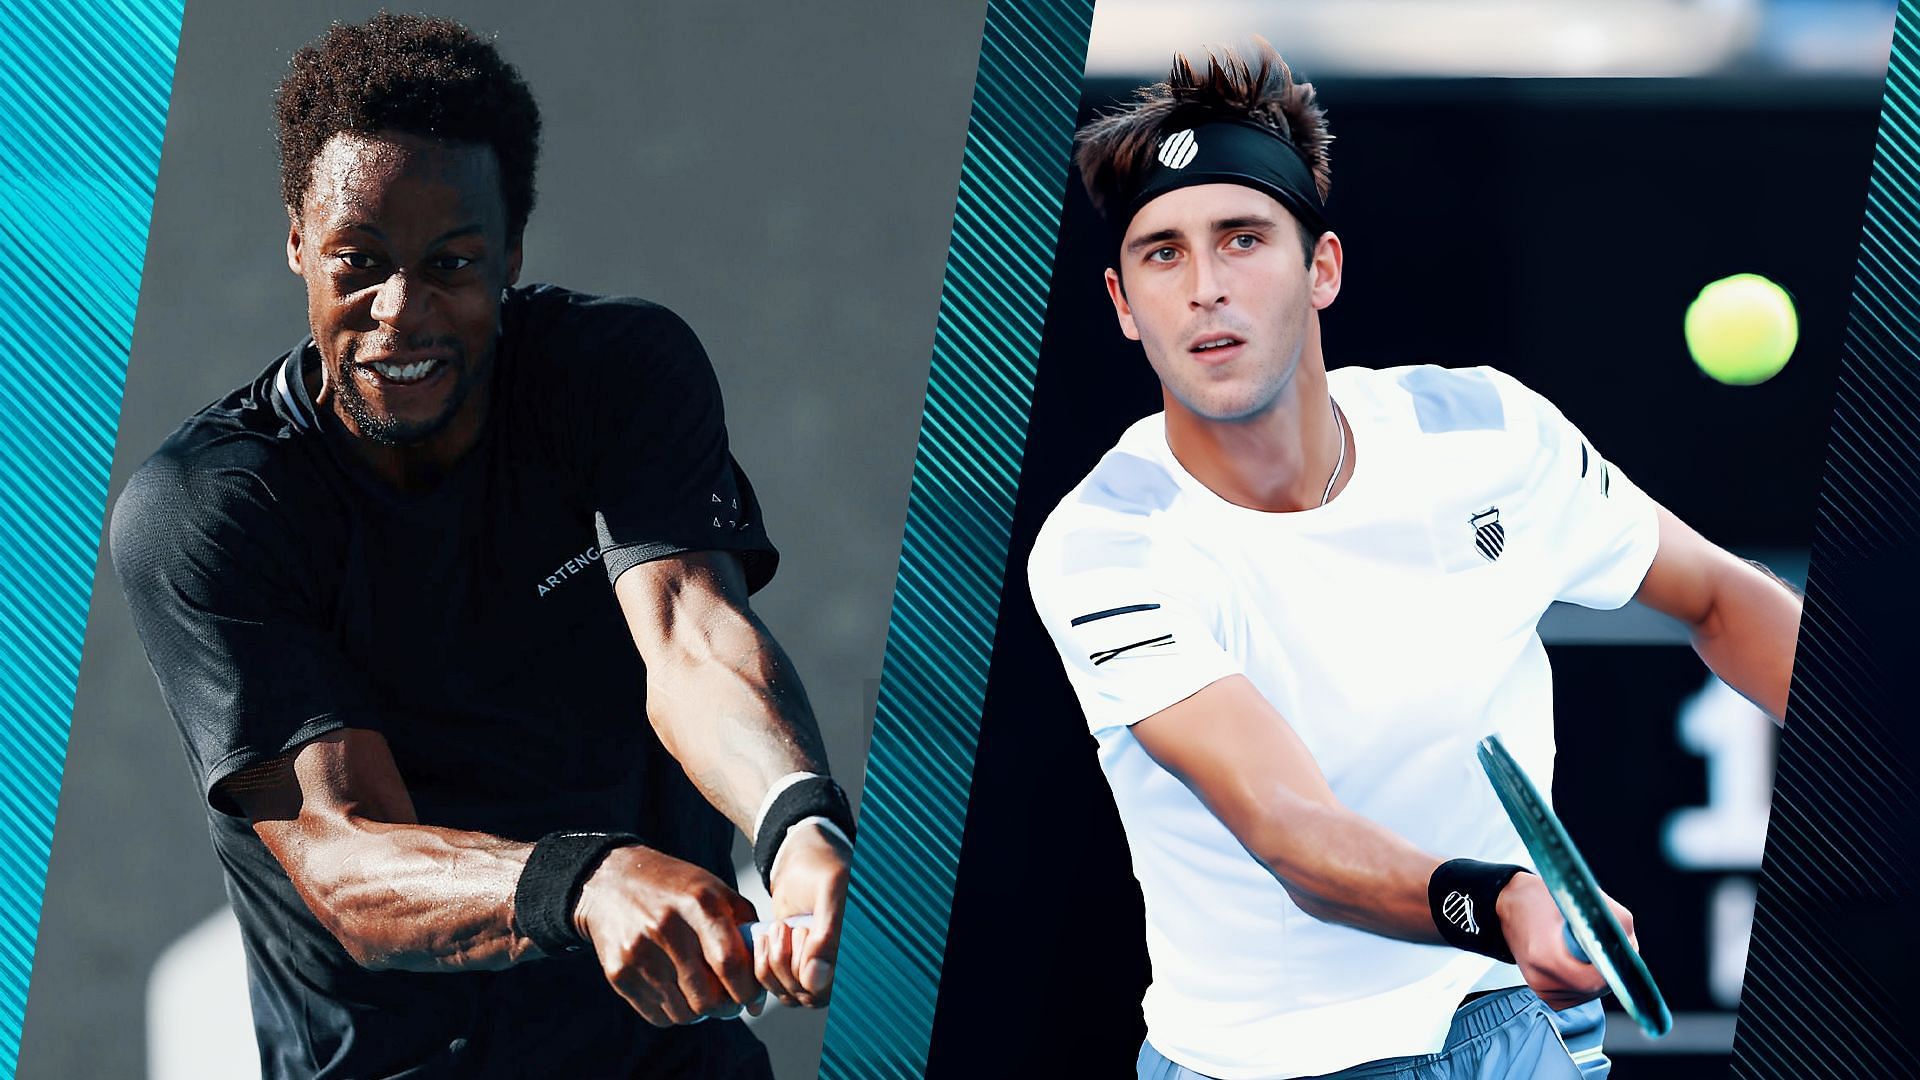 Monfils will take on Etcheverry in the second round of Australian Open